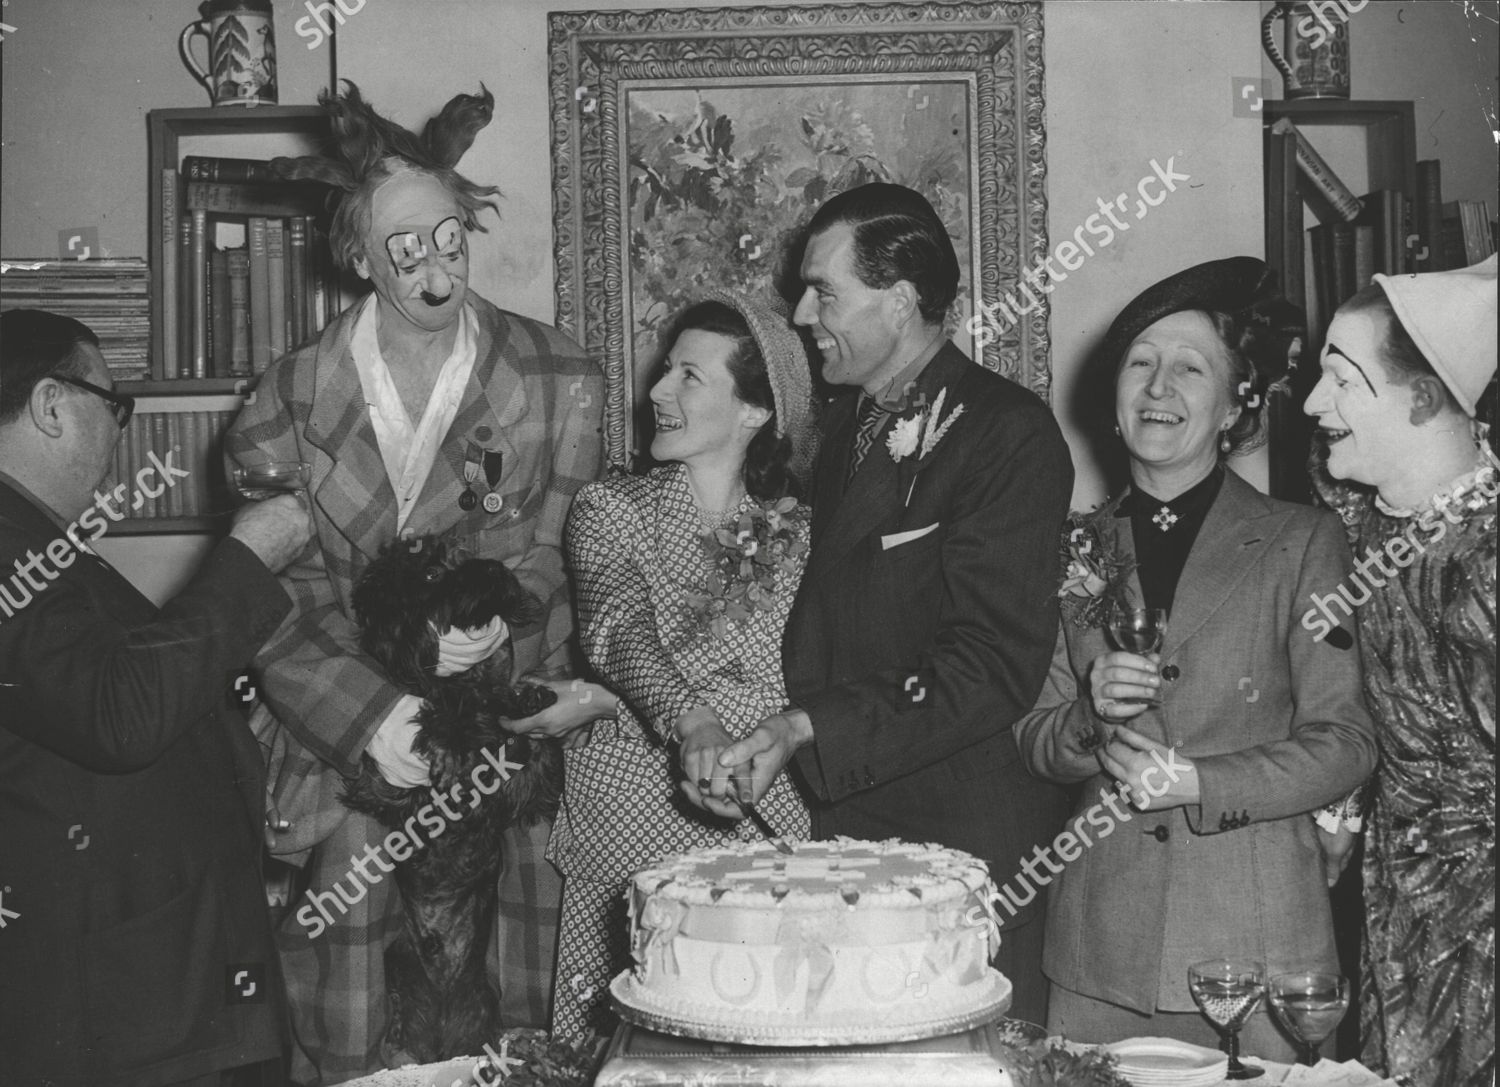 sculptor barney seale toasts the bride and groom his daughter zana seale and harold sirett on their wedding day watched by coco the clown mrs seale and cocos son michael box 0604 06072015 00210a jpg shutterstock editorial 4909343a